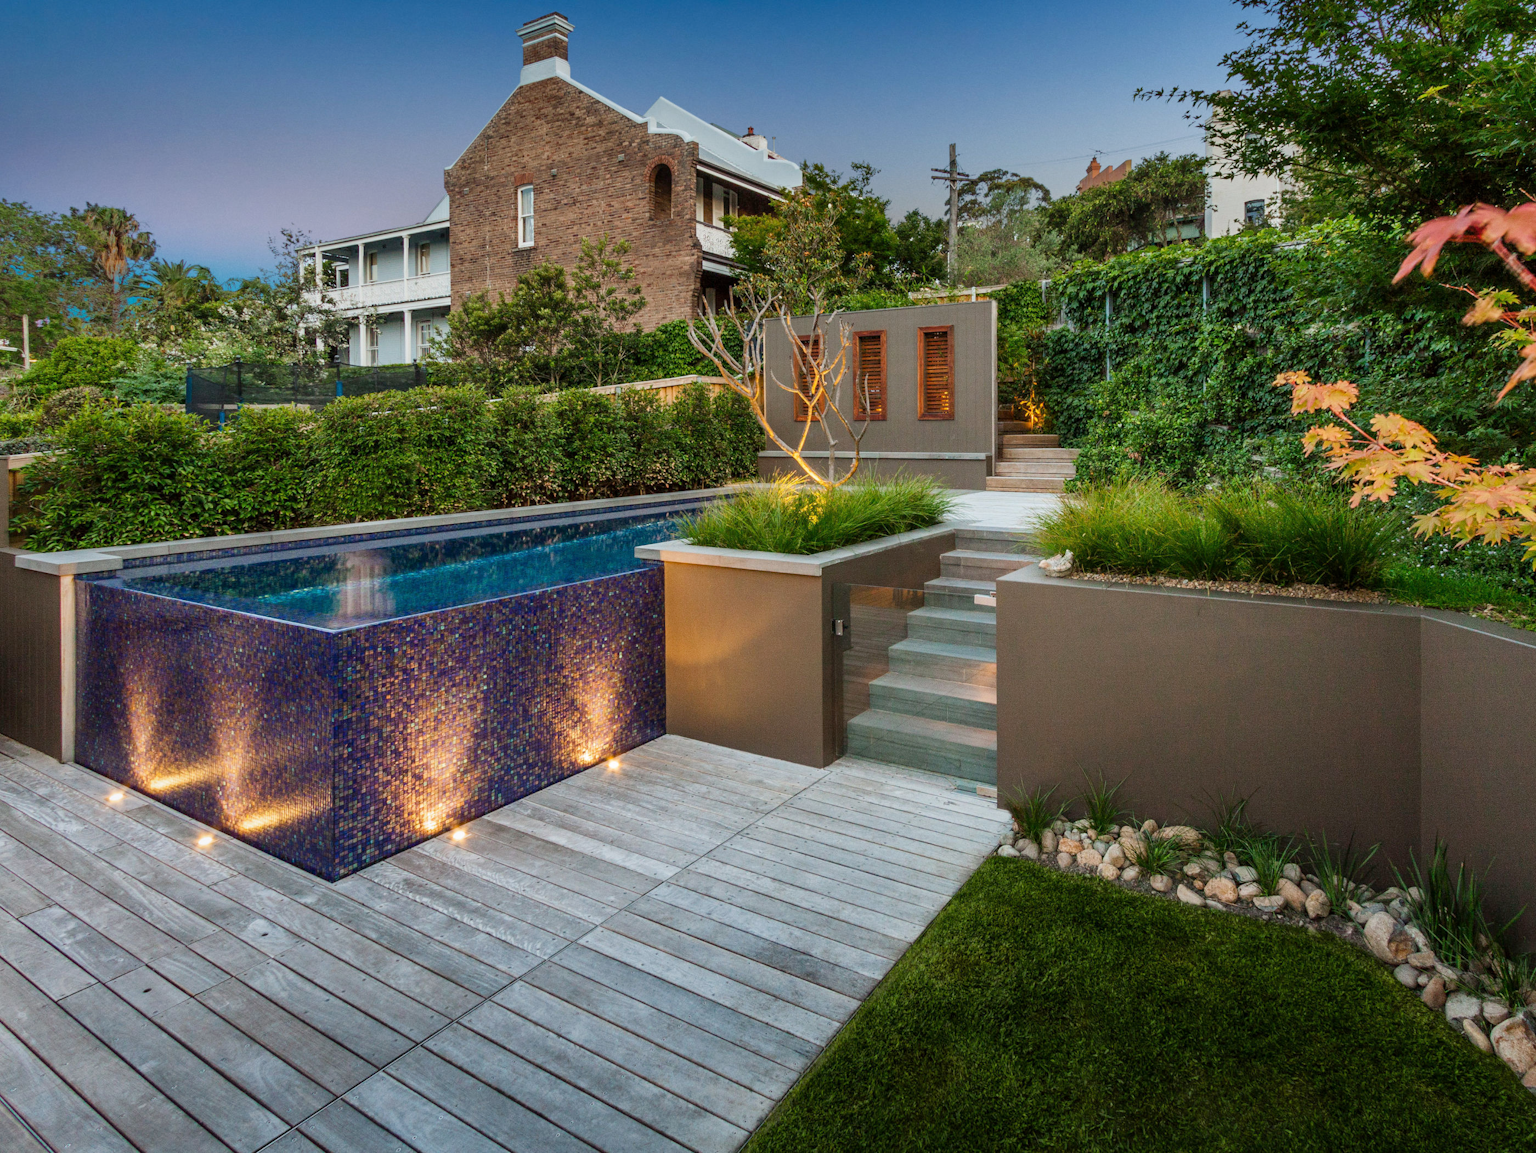 Terraced garden with bluestone pool coping and steps